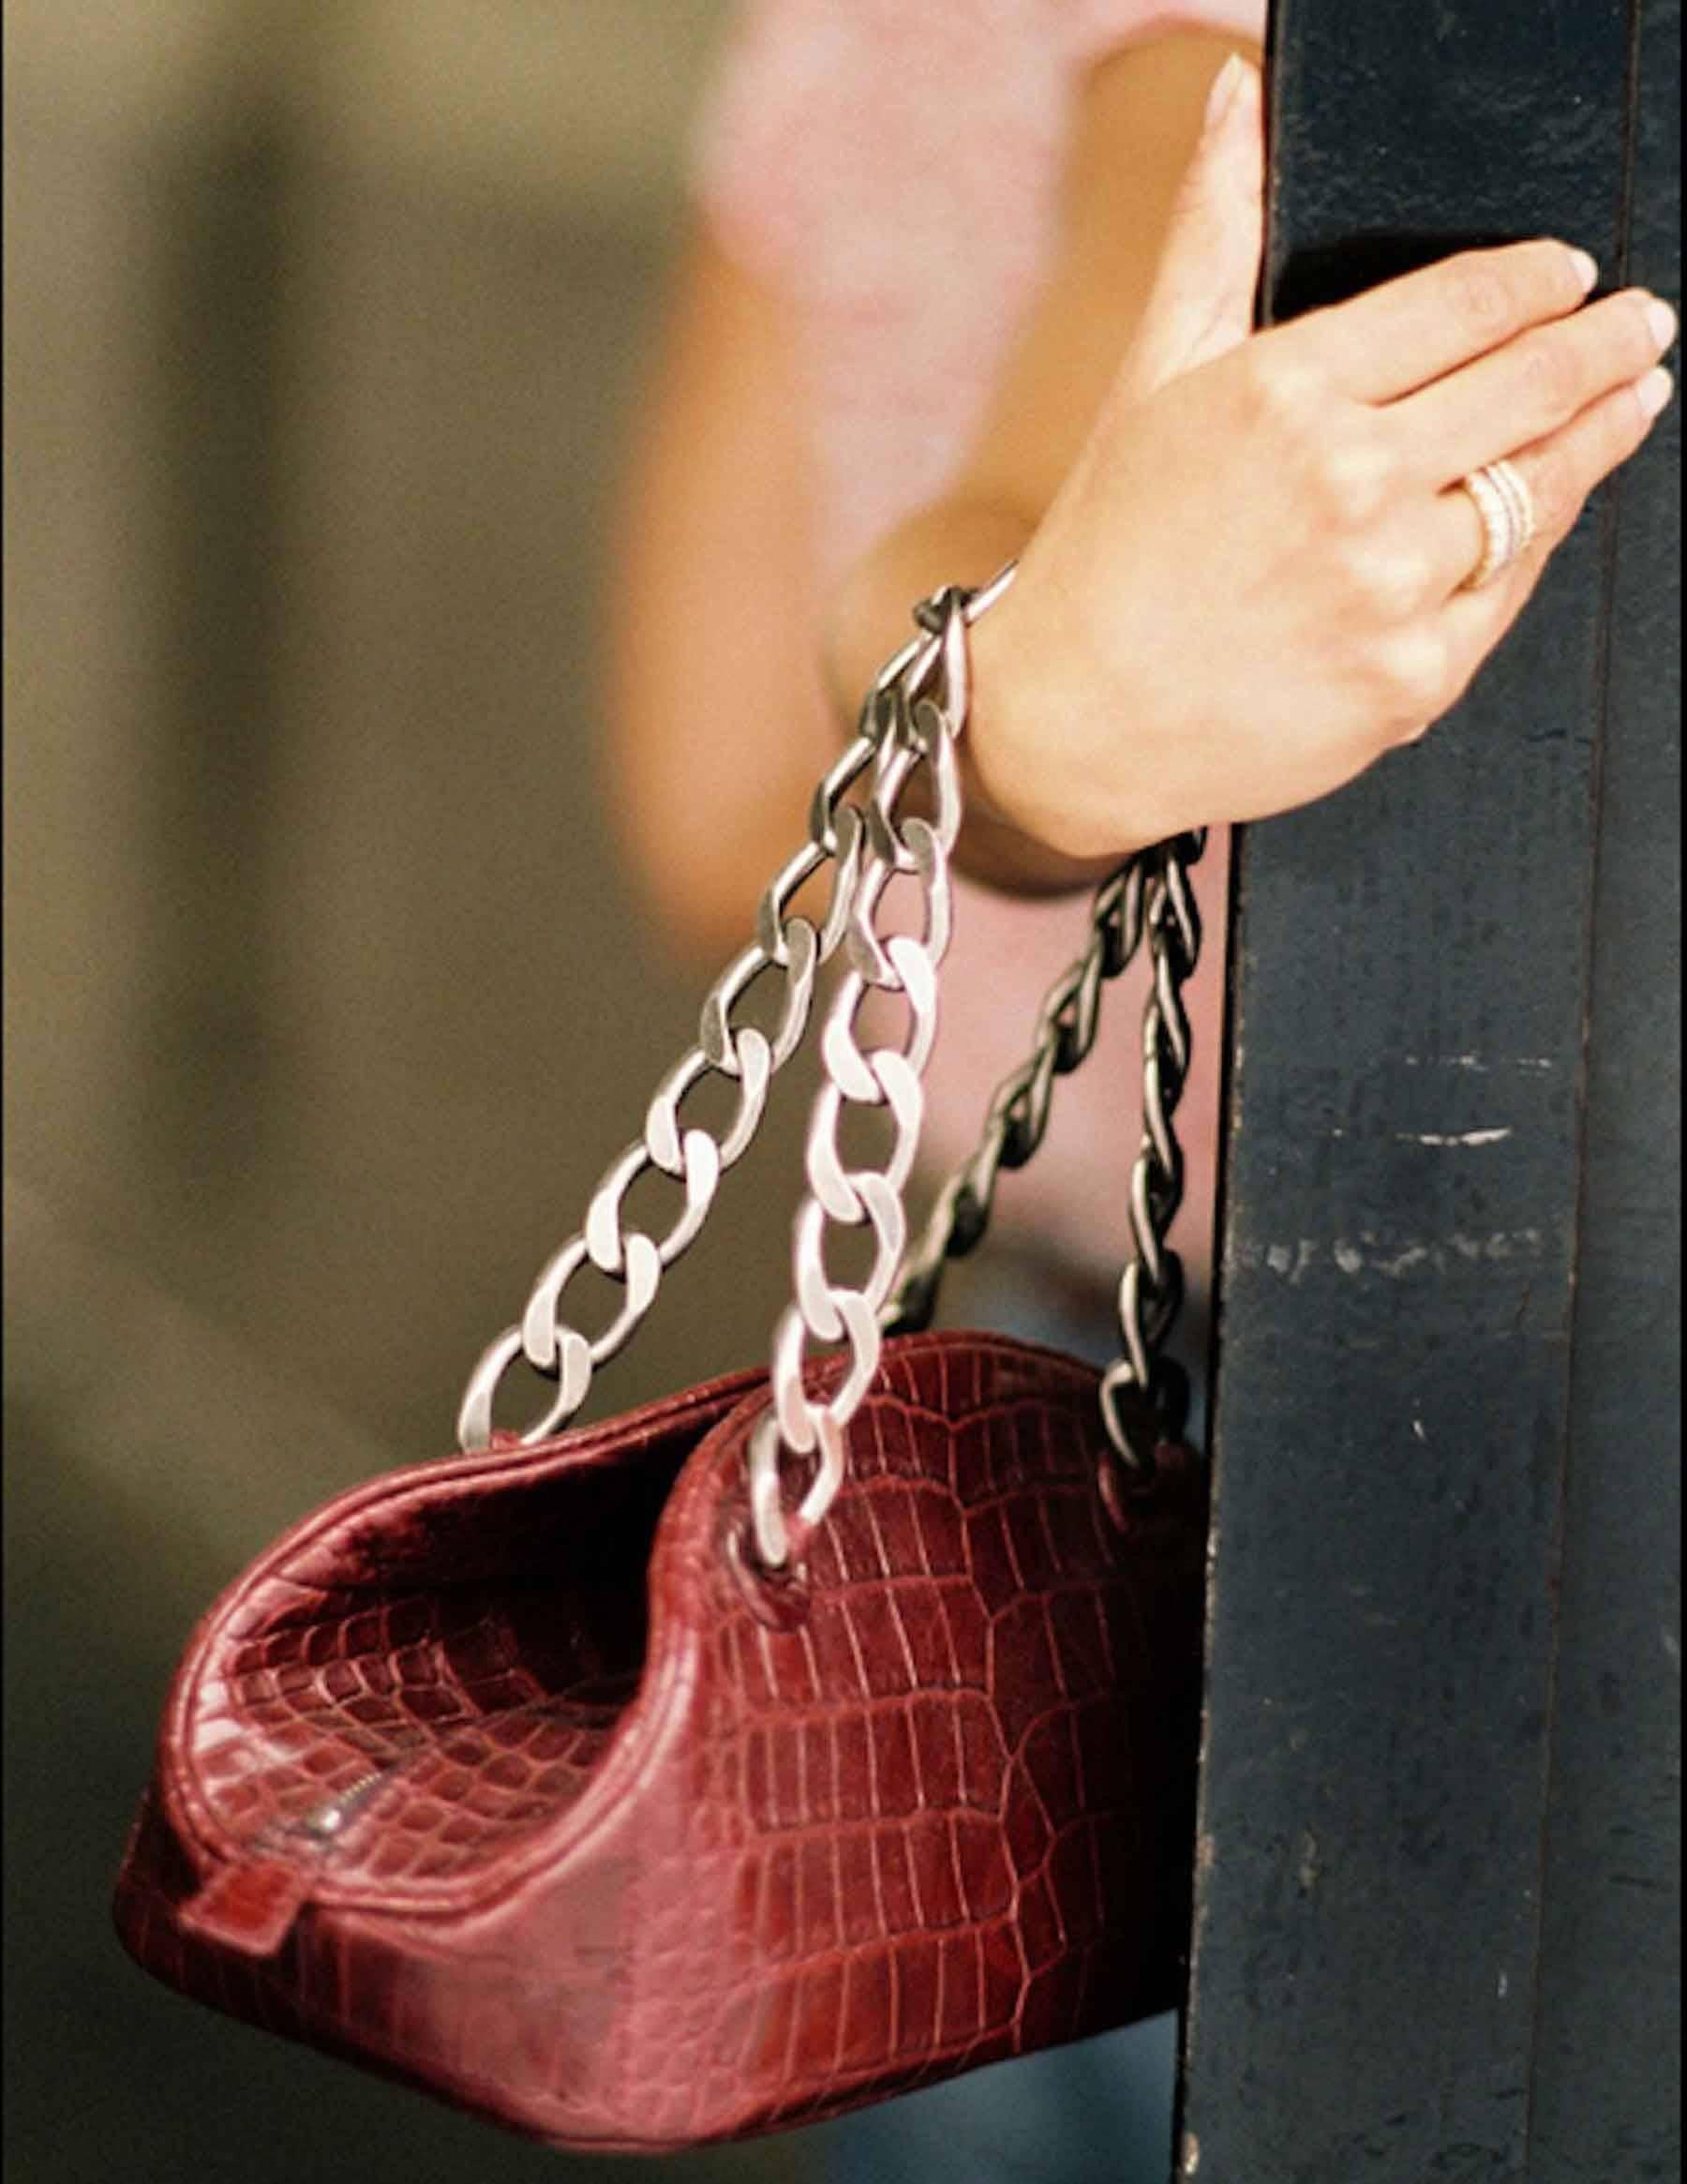 Sublime collector CHANEL bag, model 'Bowling' from the Famous Collection Paris / New York in bordeaux crocodile leather. 
Aged silver plated hardware, aged silver plated closure, handles silver chains: 40cm
Burgundy leather interior, 1 inside